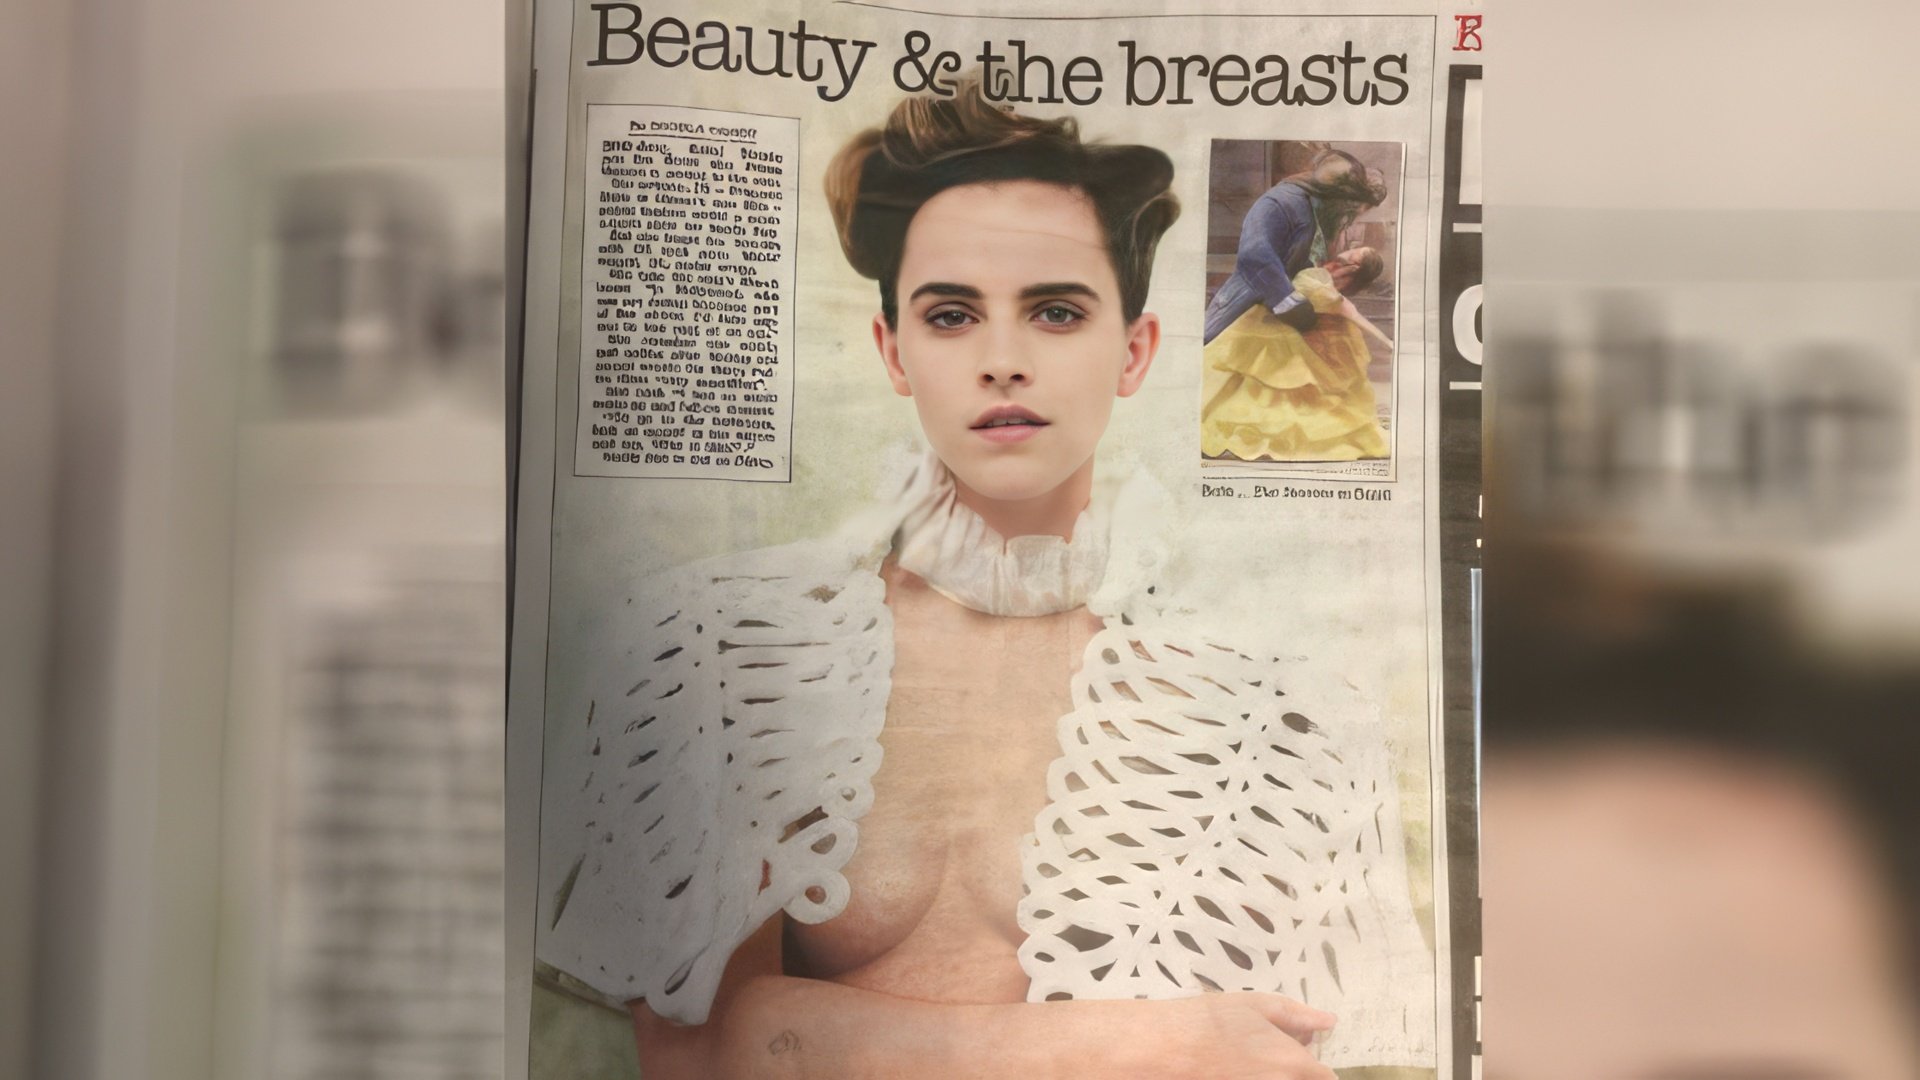 Emma Watson's topless photo sparks outrage among feminists